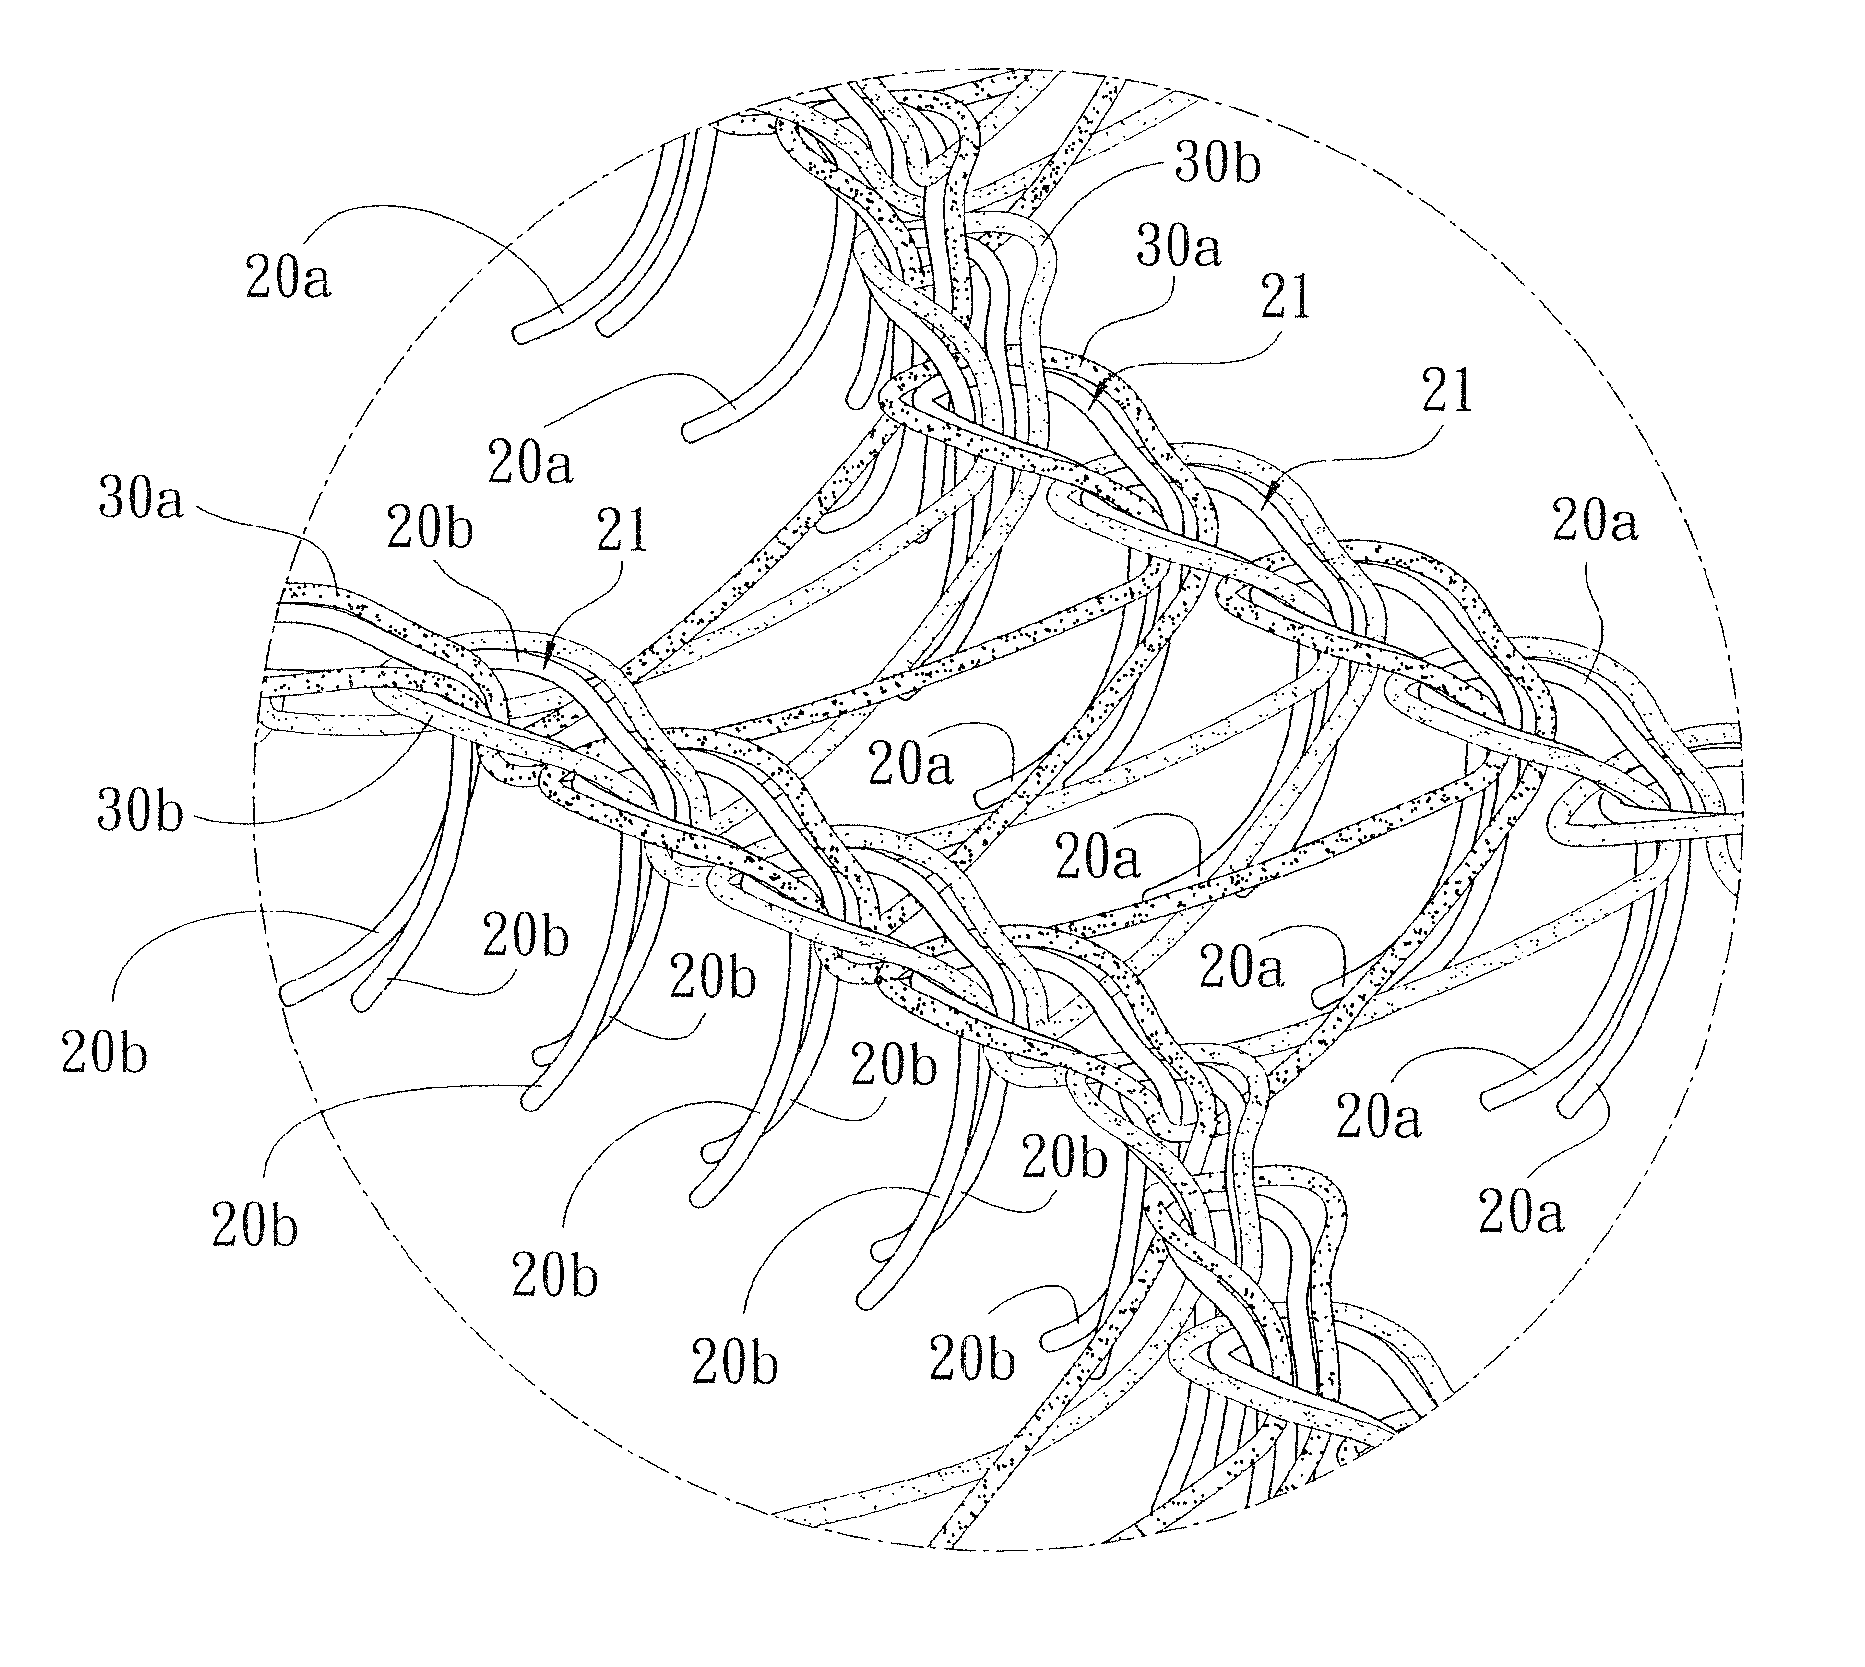 Structure of touch-fastening anti-skidding material